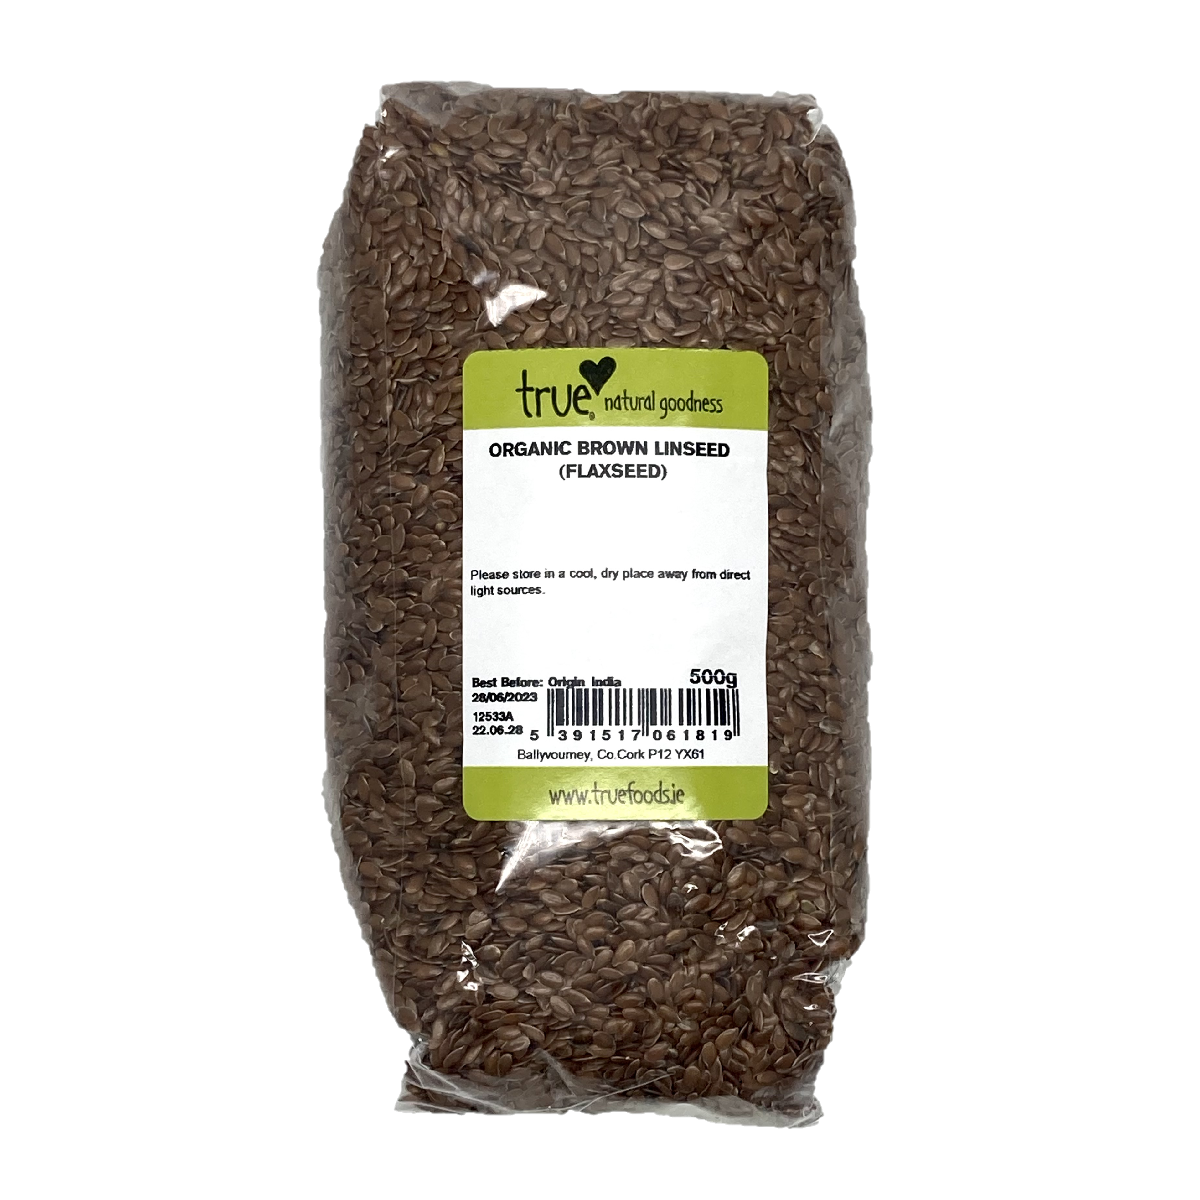 True Natural Goodness Organic Brown Linseed (Flaxseed) 500g